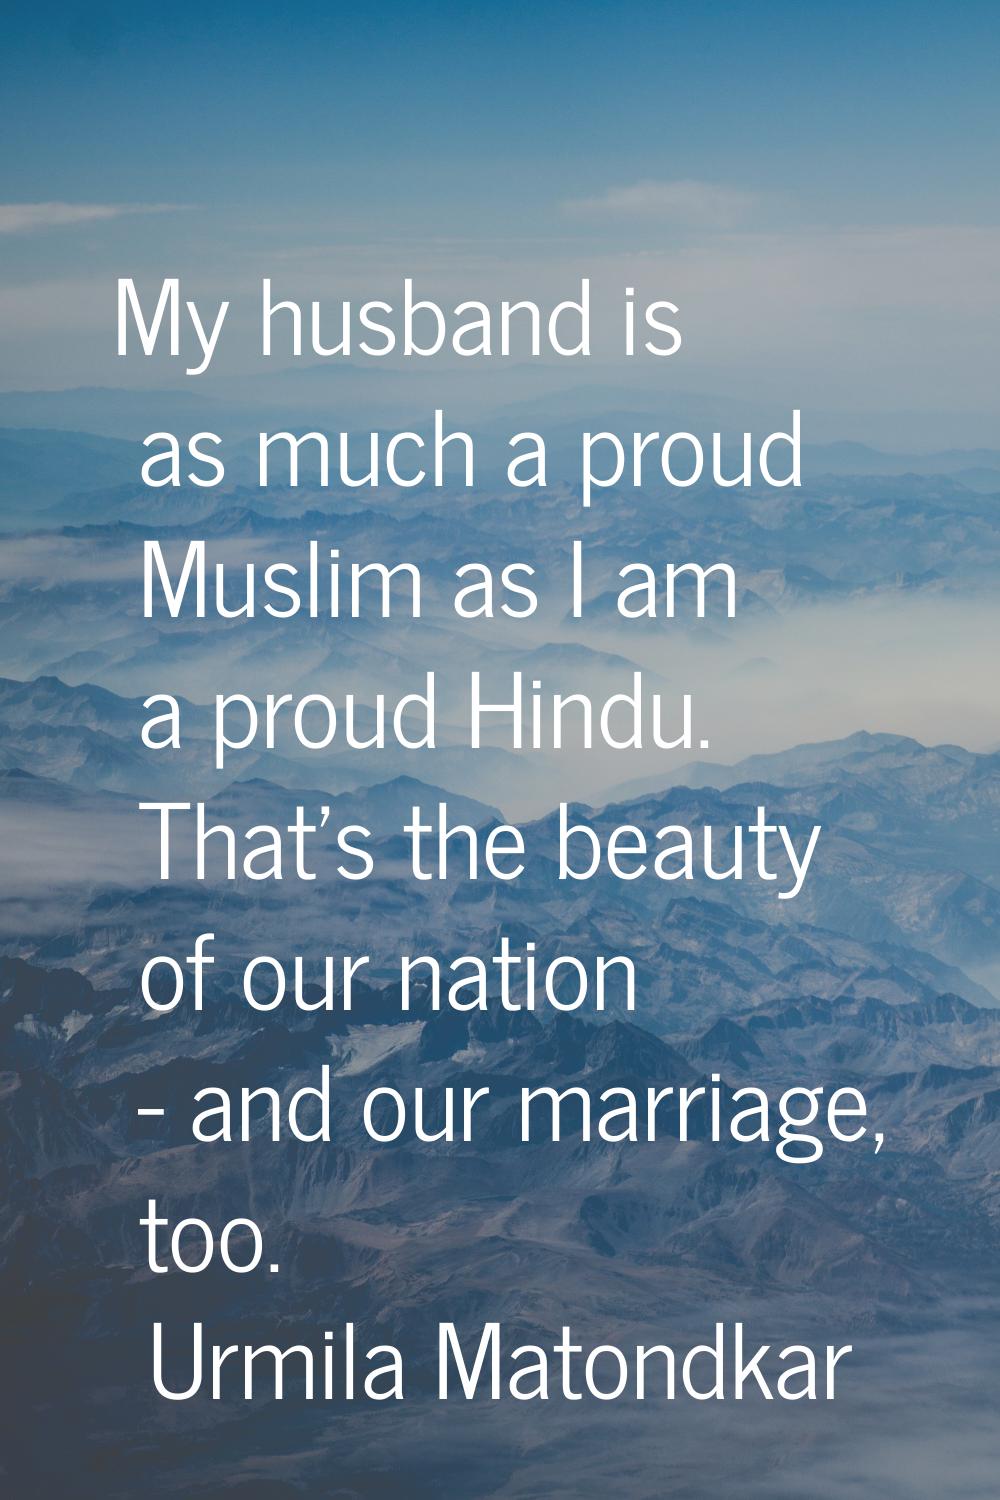 My husband is as much a proud Muslim as I am a proud Hindu. That's the beauty of our nation - and o